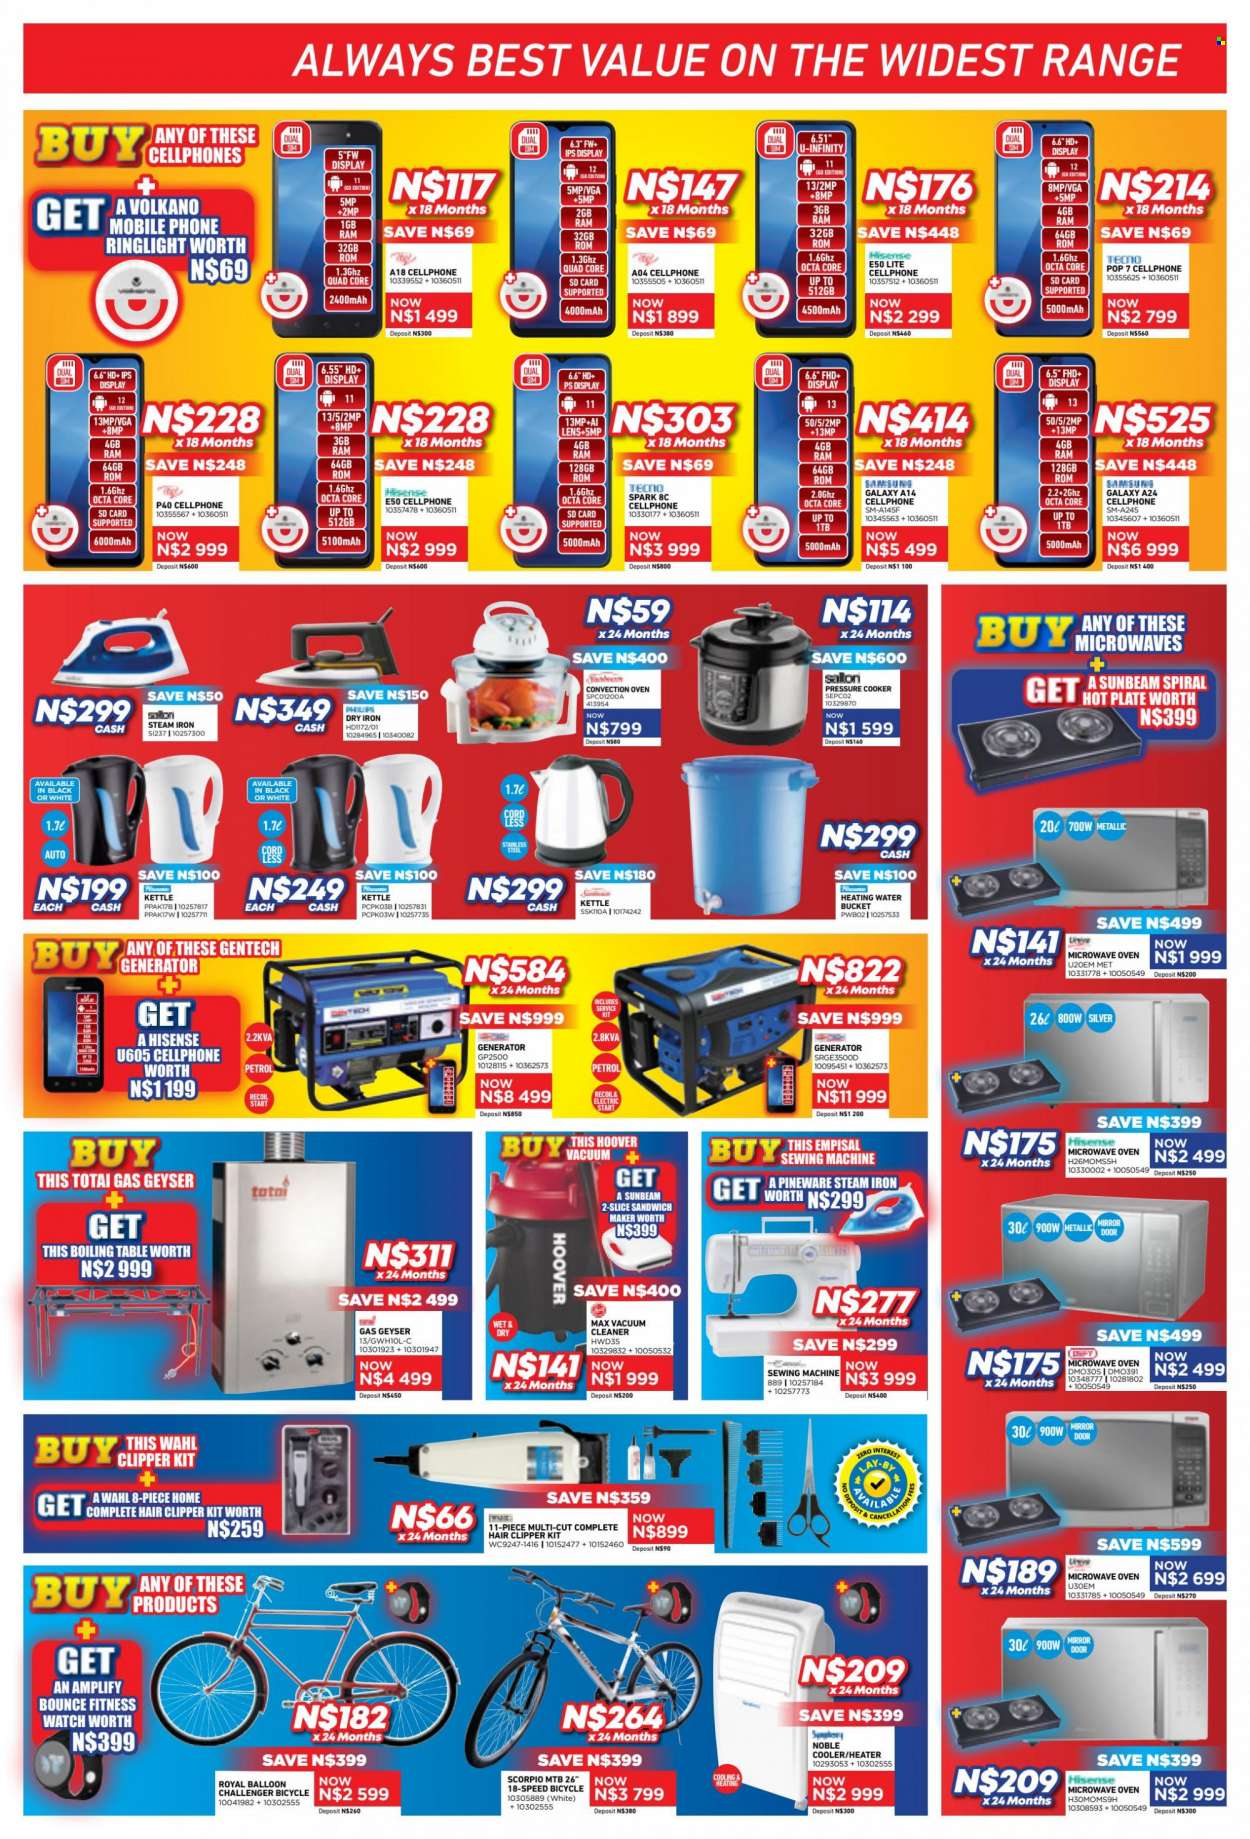 Furnmart catalogue  - 18/09/2023 - 14/10/2023 - Sales products - table, Samsung, Philips, fitness smart watch, Samsung Galaxy, memory card, Hisense, oven, convection oven, microwave, two plate stove, Sunbeam, vacuum cleaner, pressure cooker, sandwich maker, kettle, iron, steam iron, bicycle, generator. Page 7.